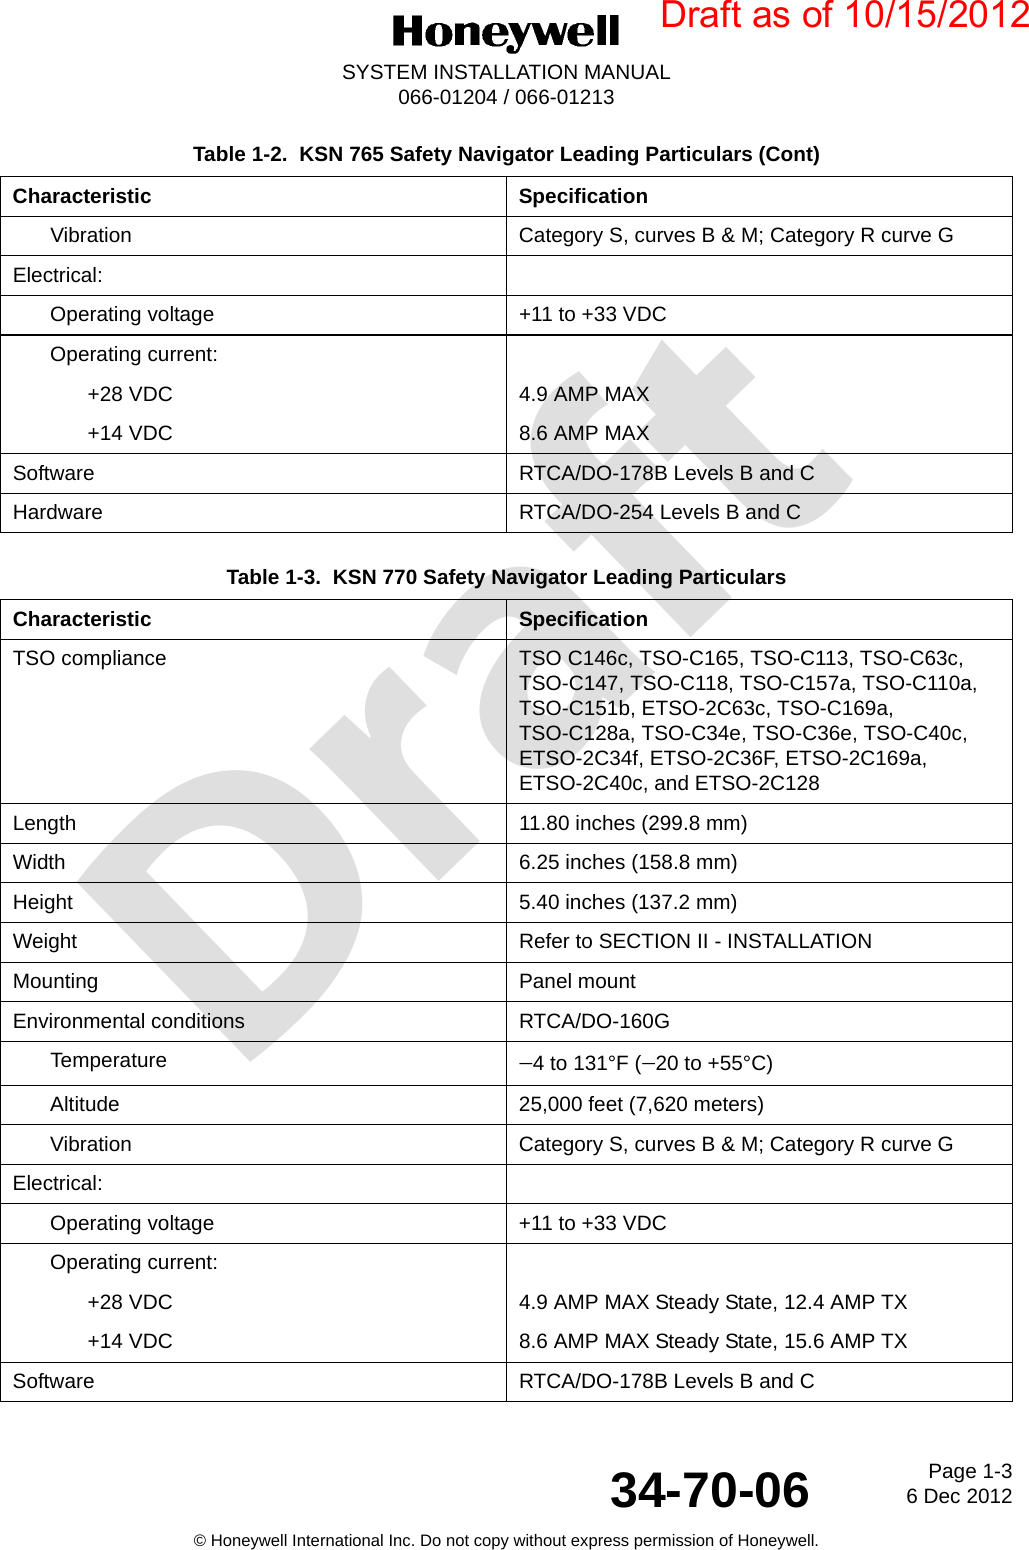 DraftPage 1-36 Dec 201234-70-06SYSTEM INSTALLATION MANUAL066-01204 / 066-01213© Honeywell International Inc. Do not copy without express permission of Honeywell.Vibration Category S, curves B &amp; M; Category R curve GElectrical:Operating voltage +11 to +33 VDCOperating current:+28 VDC 4.9 AMP MAX+14 VDC 8.6 AMP MAXSoftware RTCA/DO-178B Levels B and CHardware RTCA/DO-254 Levels B and CTable 1-3.  KSN 770 Safety Navigator Leading Particulars Characteristic SpecificationTSO compliance TSO C146c, TSO-C165, TSO-C113, TSO-C63c, TSO-C147, TSO-C118, TSO-C157a, TSO-C110a, TSO-C151b, ETSO-2C63c, TSO-C169a, TSO-C128a, TSO-C34e, TSO-C36e, TSO-C40c, ETSO-2C34f, ETSO-2C36F, ETSO-2C169a, ETSO-2C40c, and ETSO-2C128Length 11.80 inches (299.8 mm)Width 6.25 inches (158.8 mm)Height 5.40 inches (137.2 mm)Weight Refer to SECTION II - INSTALLATIONMounting Panel mountEnvironmental conditions RTCA/DO-160GTemperature 4 to 131°F (20 to +55°C)Altitude 25,000 feet (7,620 meters)Vibration Category S, curves B &amp; M; Category R curve GElectrical:Operating voltage +11 to +33 VDCOperating current:+28 VDC 4.9 AMP MAX Steady State, 12.4 AMP TX+14 VDC 8.6 AMP MAX Steady State, 15.6 AMP TXSoftware RTCA/DO-178B Levels B and CTable 1-2.  KSN 765 Safety Navigator Leading Particulars (Cont)Characteristic SpecificationDraft as of 10/15/2012